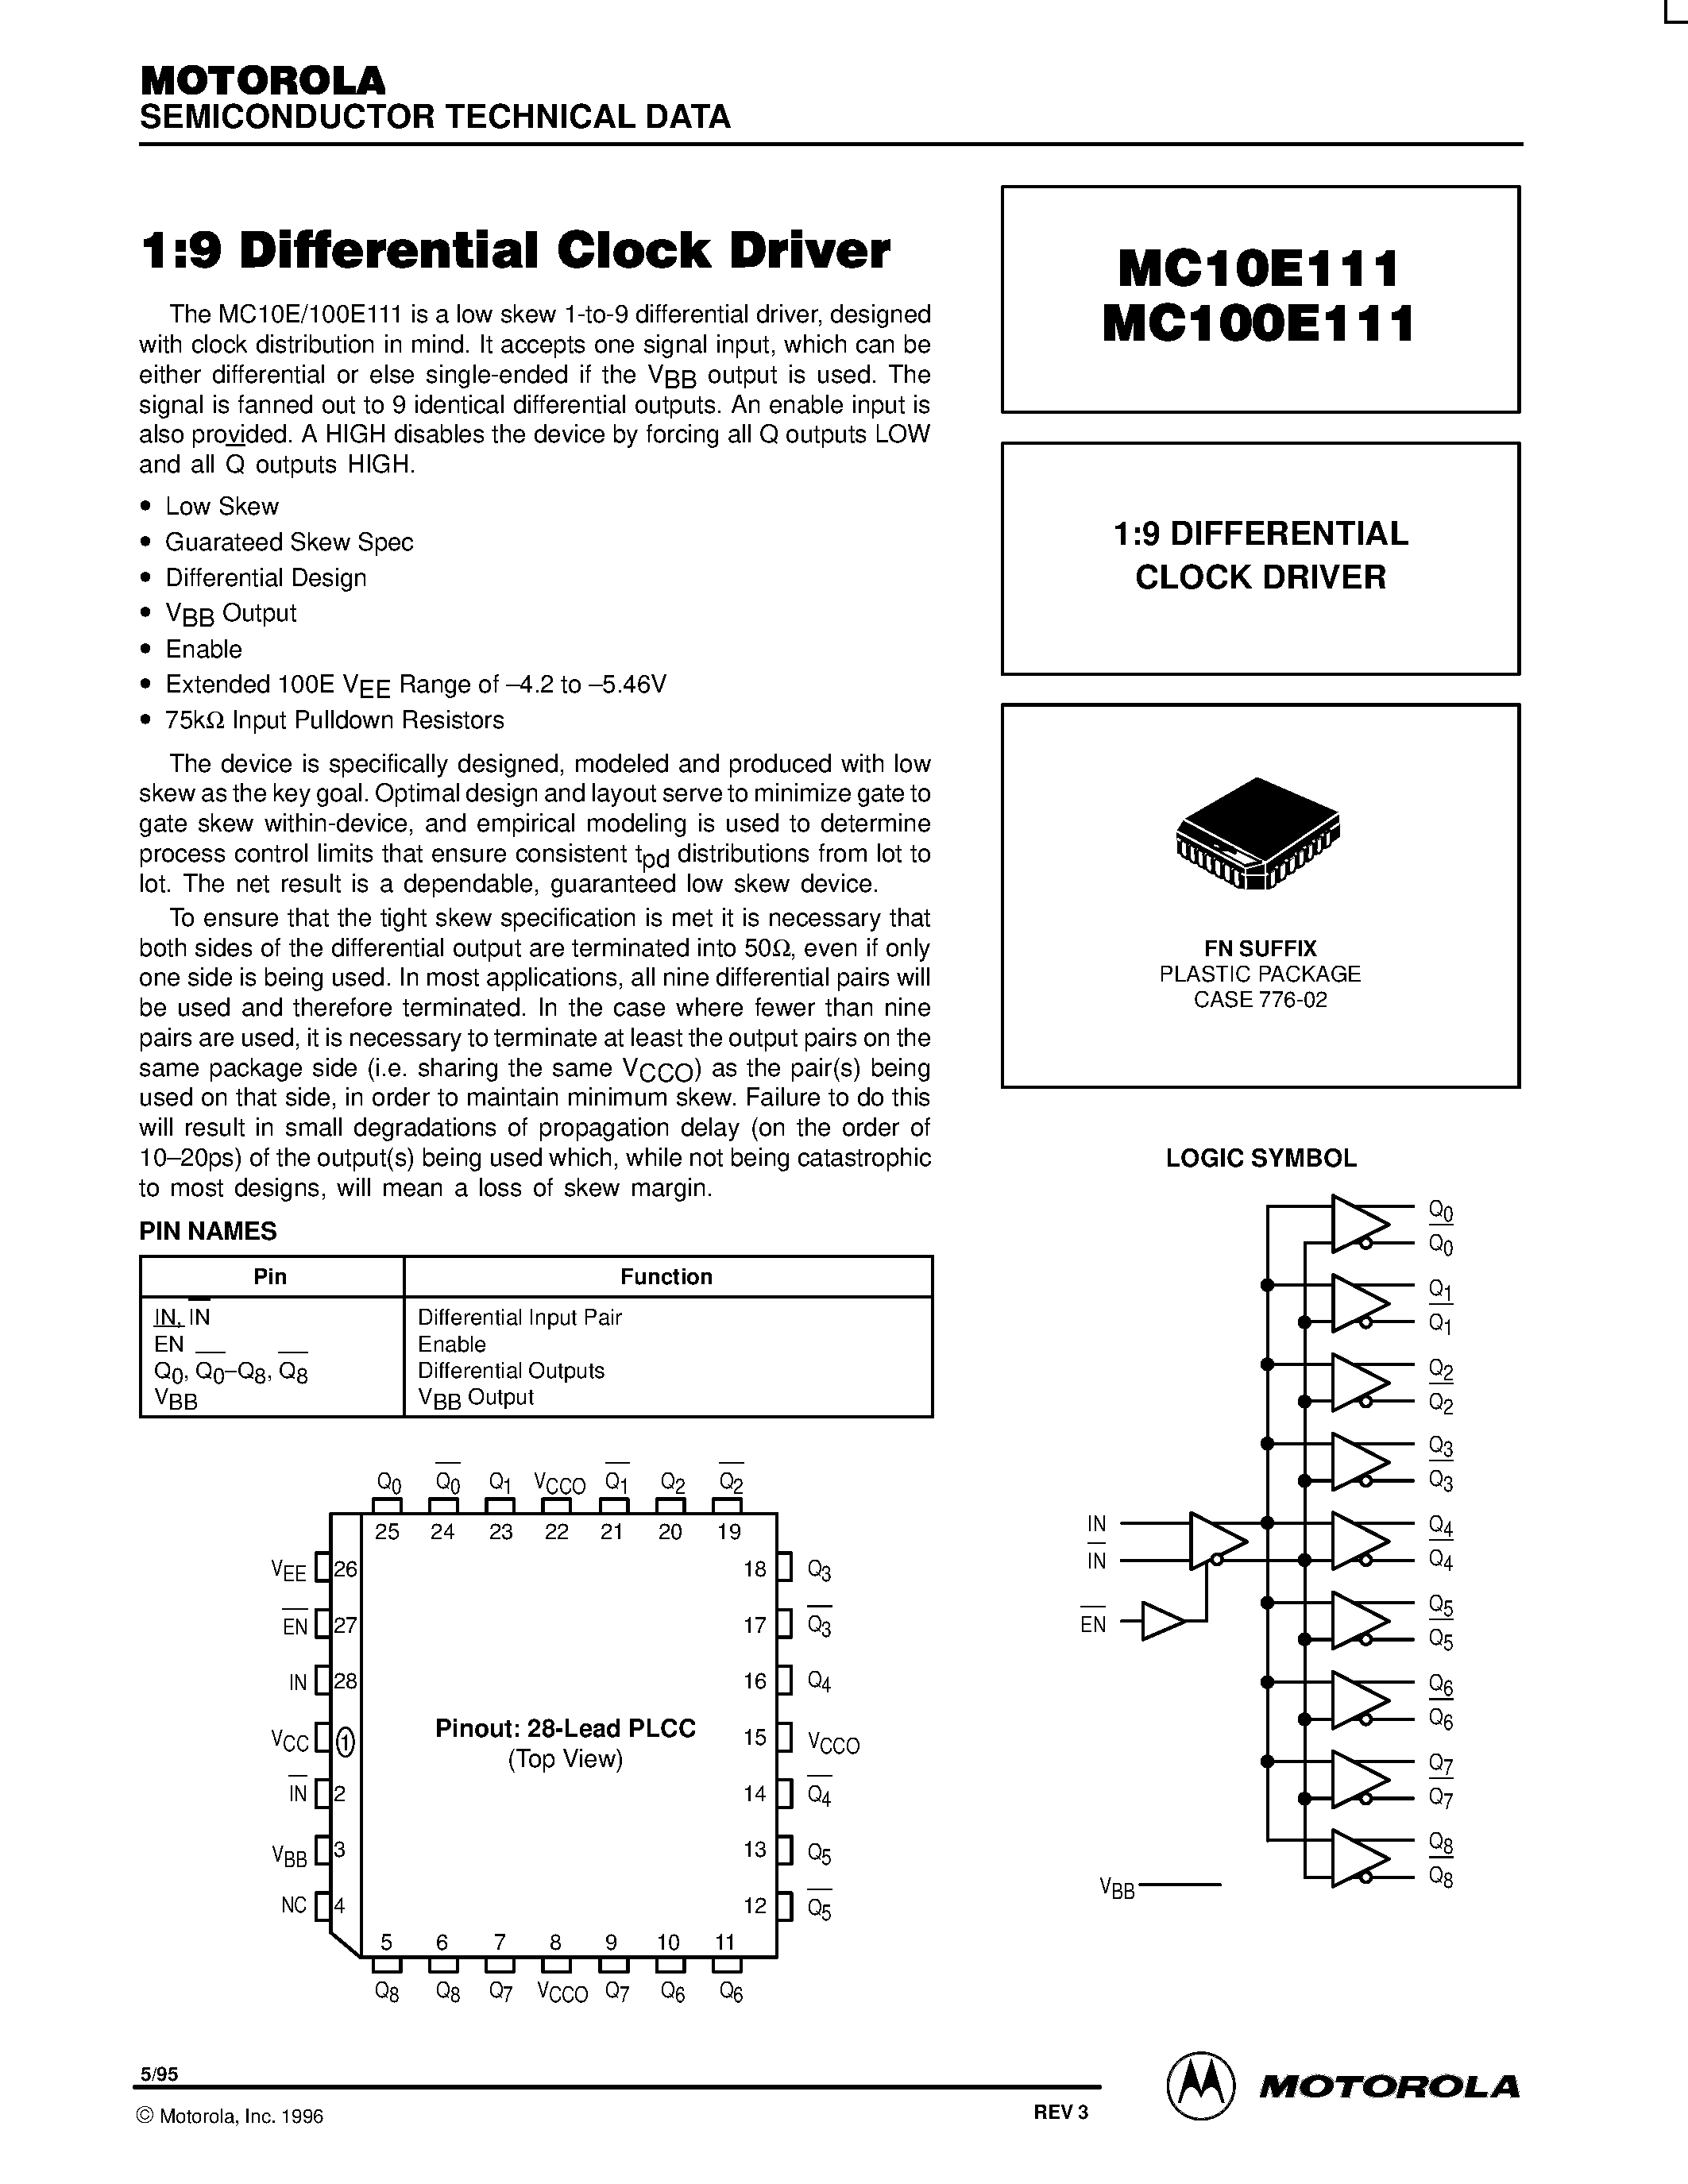 Datasheet MC100E111FN - 1:9 DIFFERENTIAL CLOCK DRIVER page 1